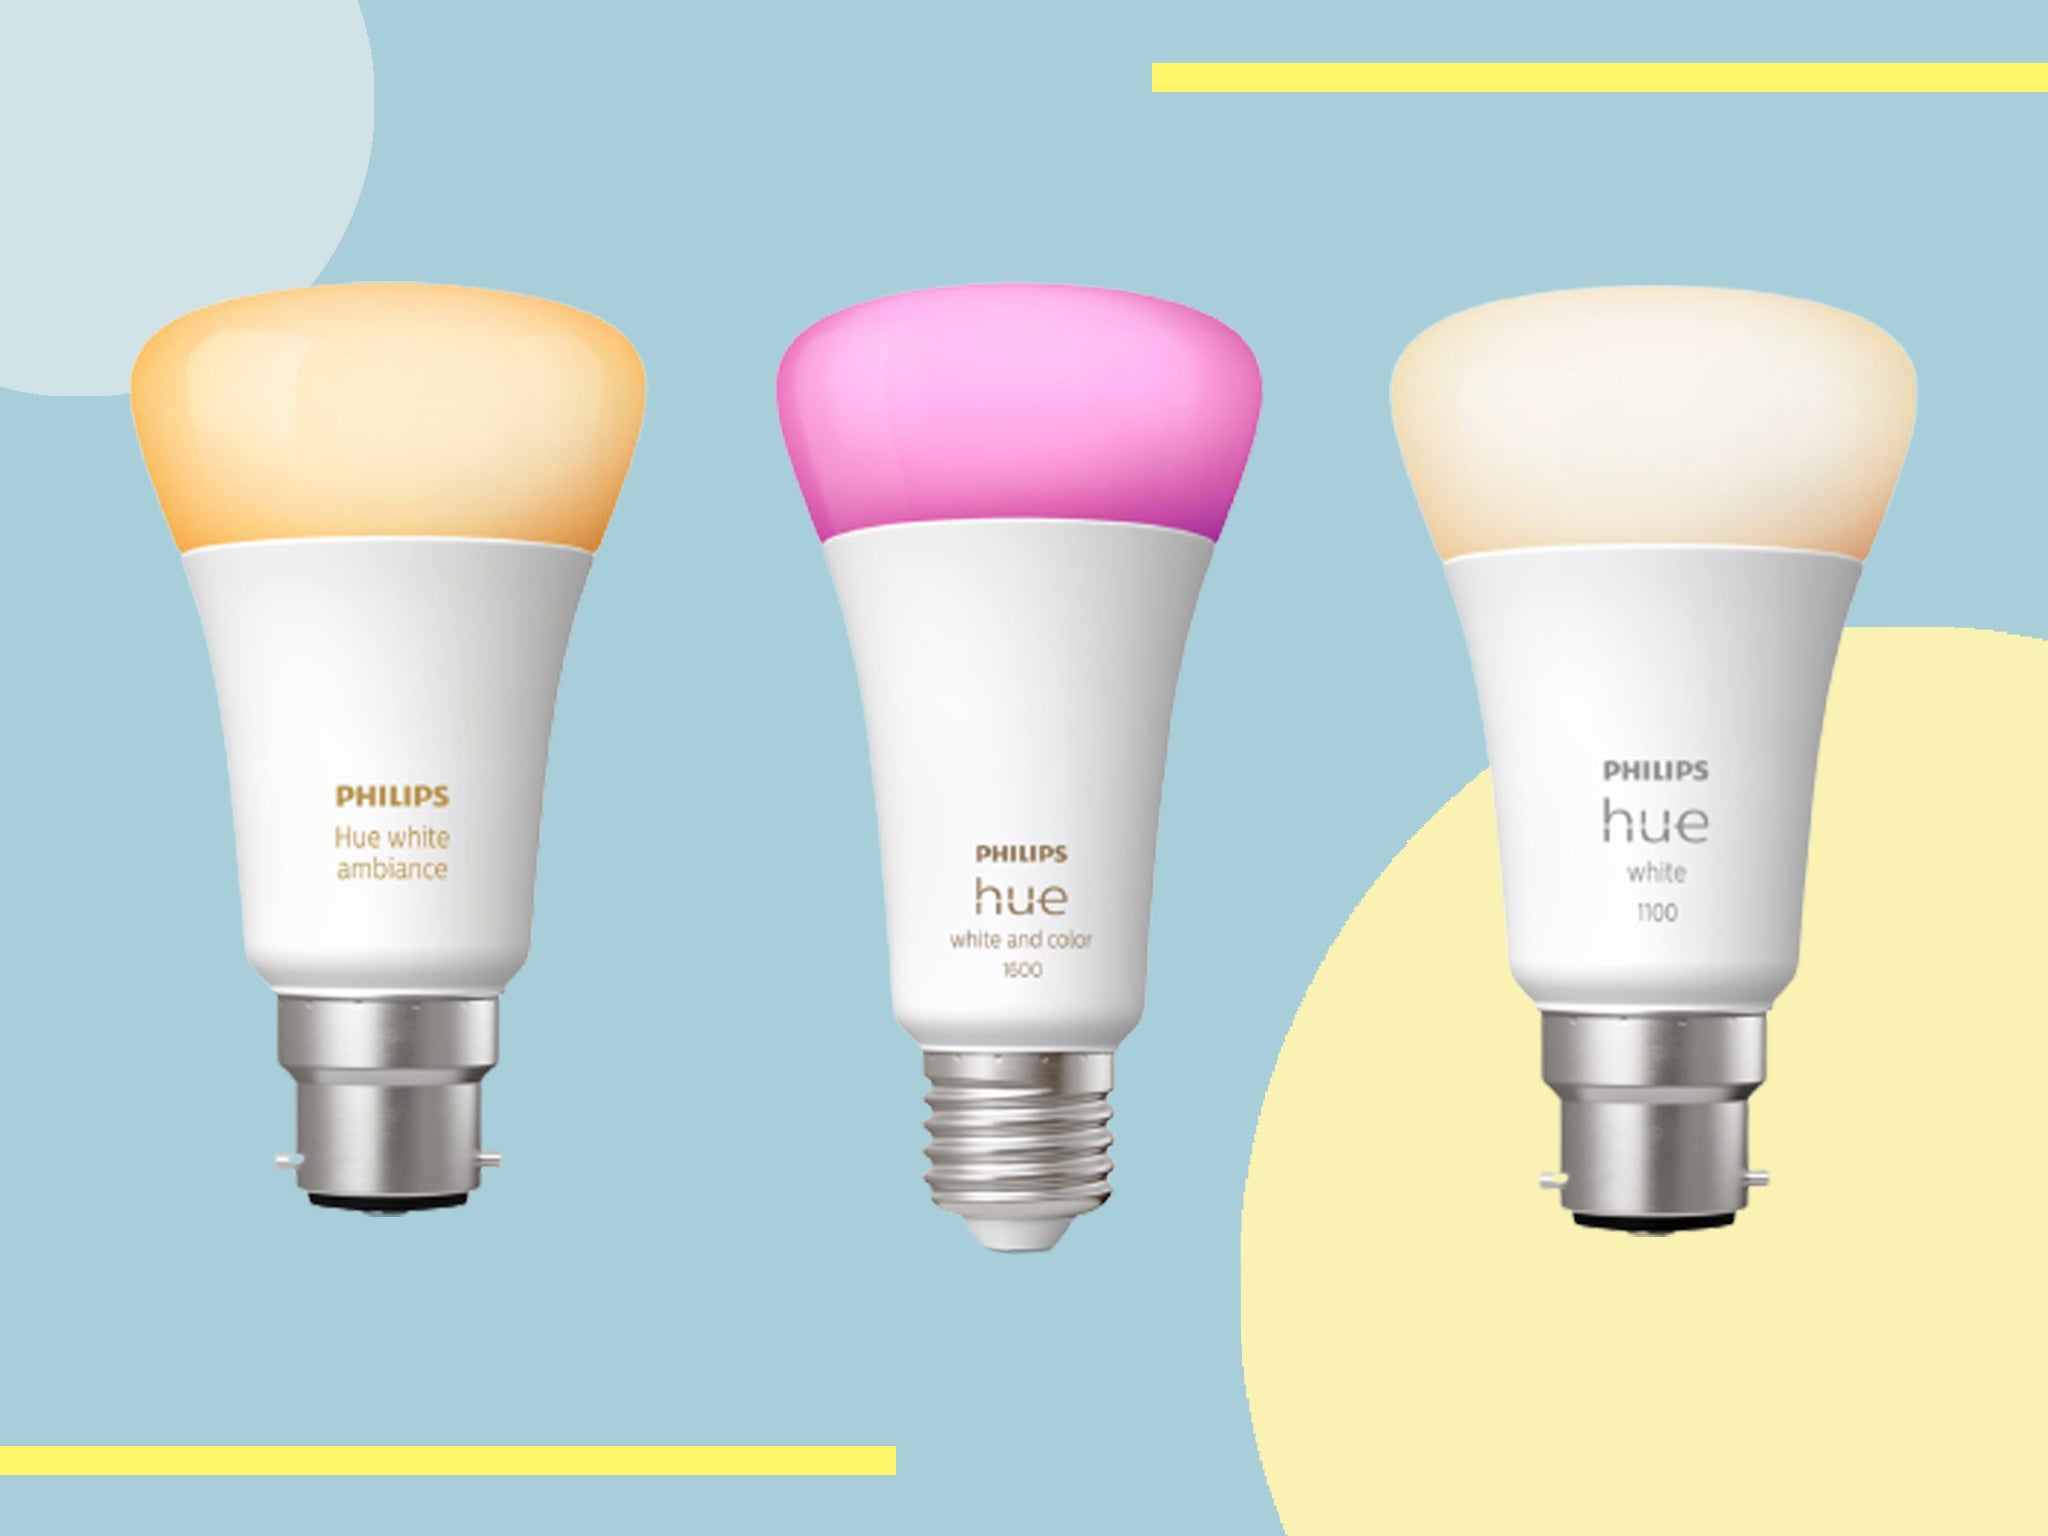 Add a splash of colour to your home with these simple-to-install bulbs